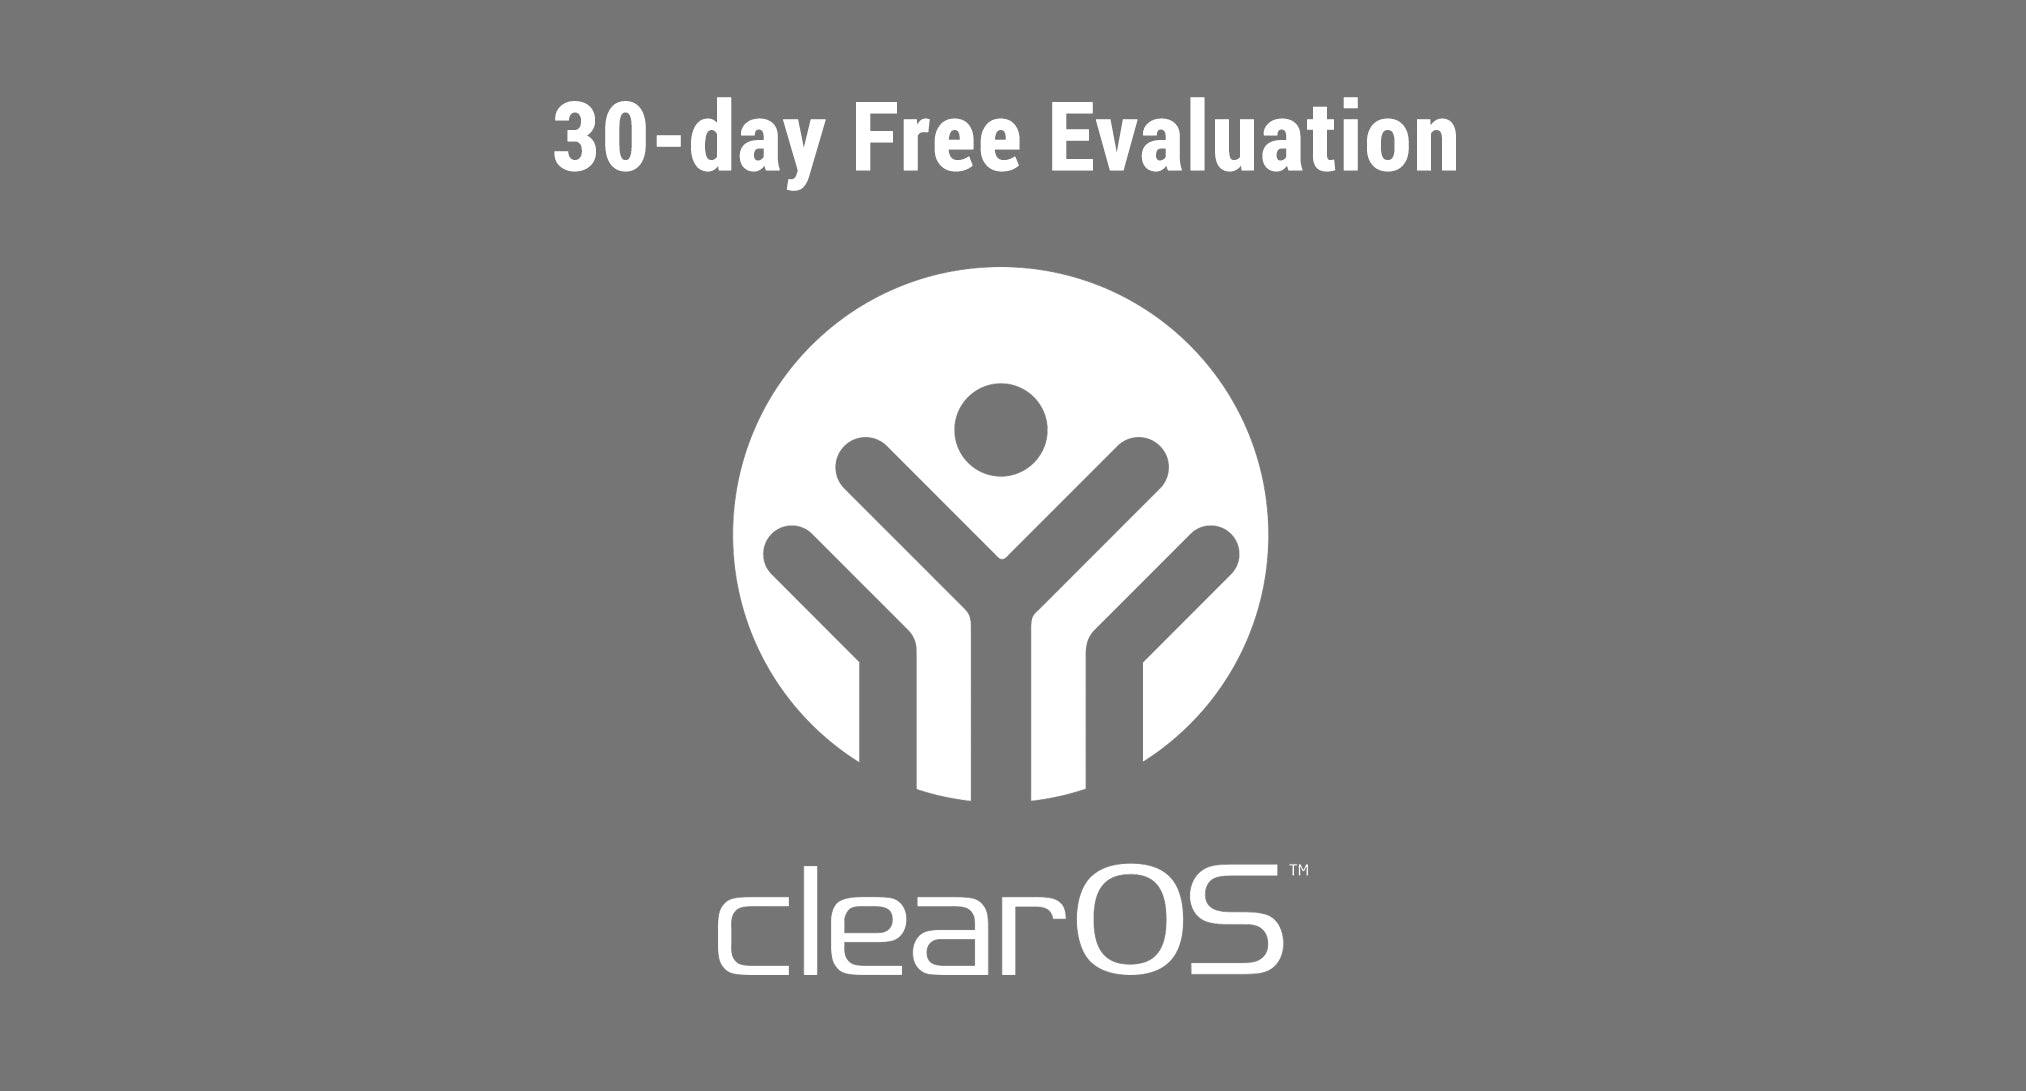 How to Get a Free ClearOS Business Edition 30-day Evaluation